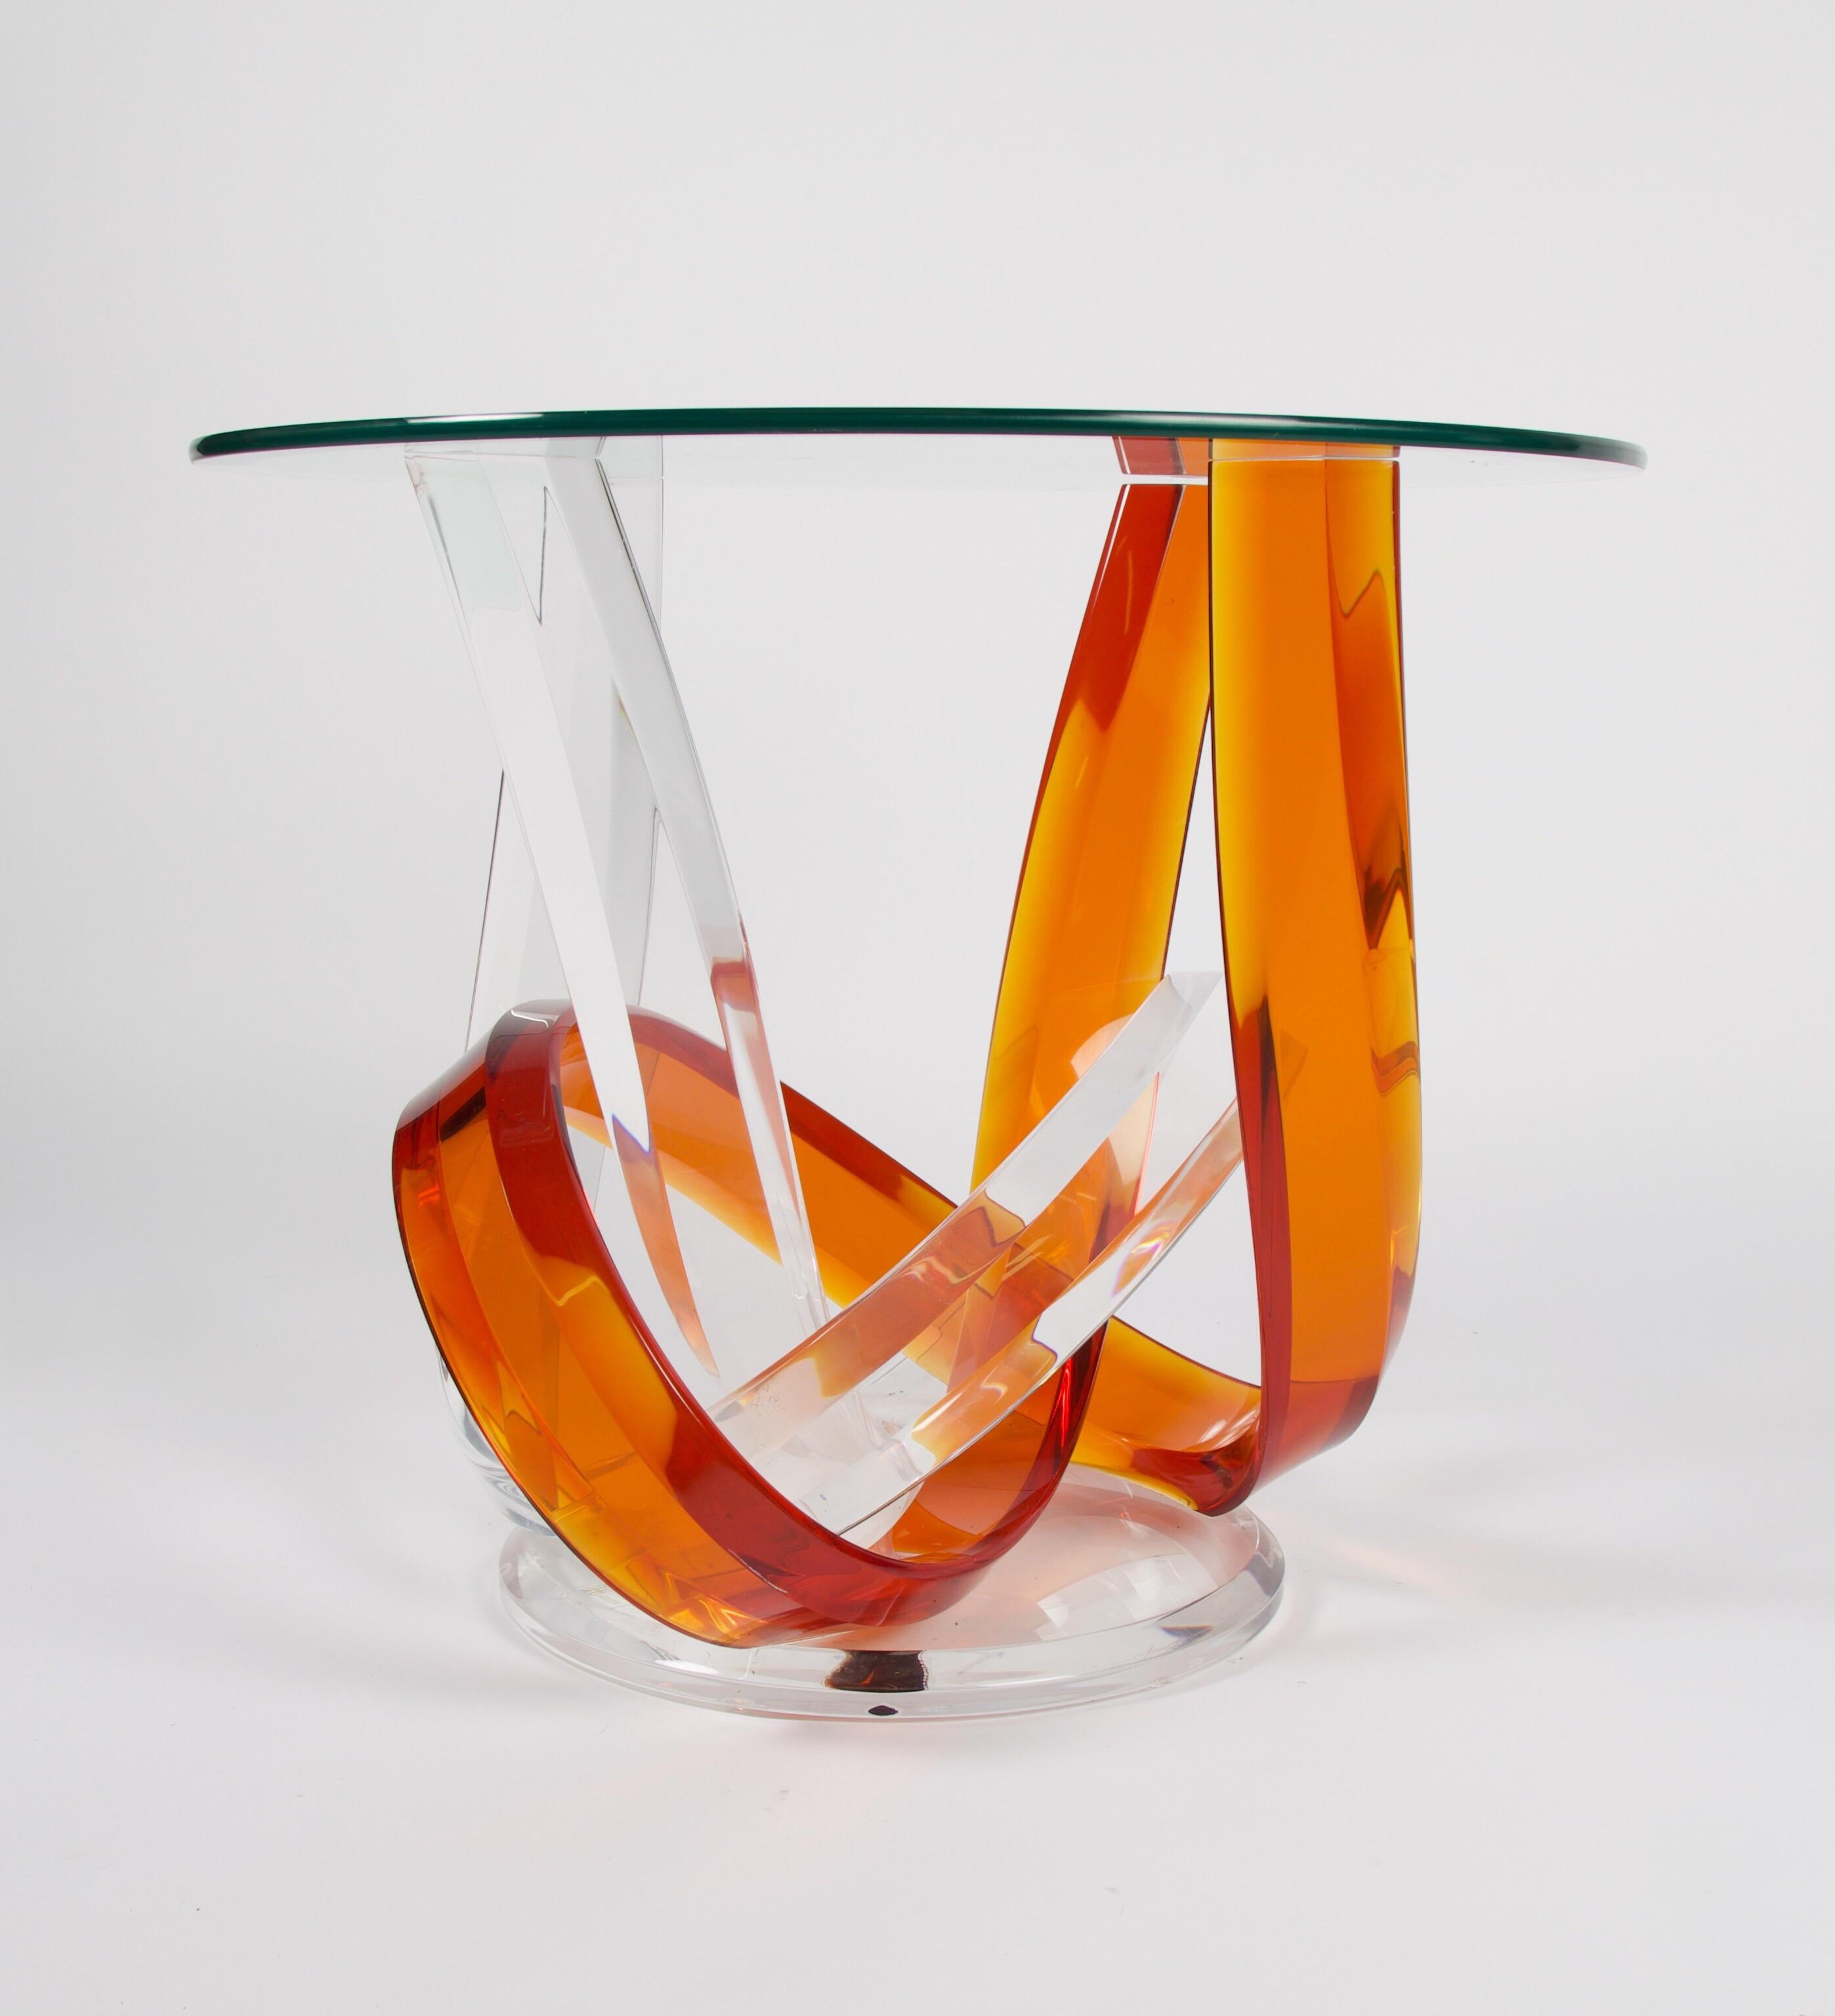 A signed Haziza Lucite side table with intertwined clear and orange lucite pieces with a round beveled glass top. A great accent piece to add a vibrant pop of color to your decor. Great as a bedside table or beside a chair.
By the time Shlomi